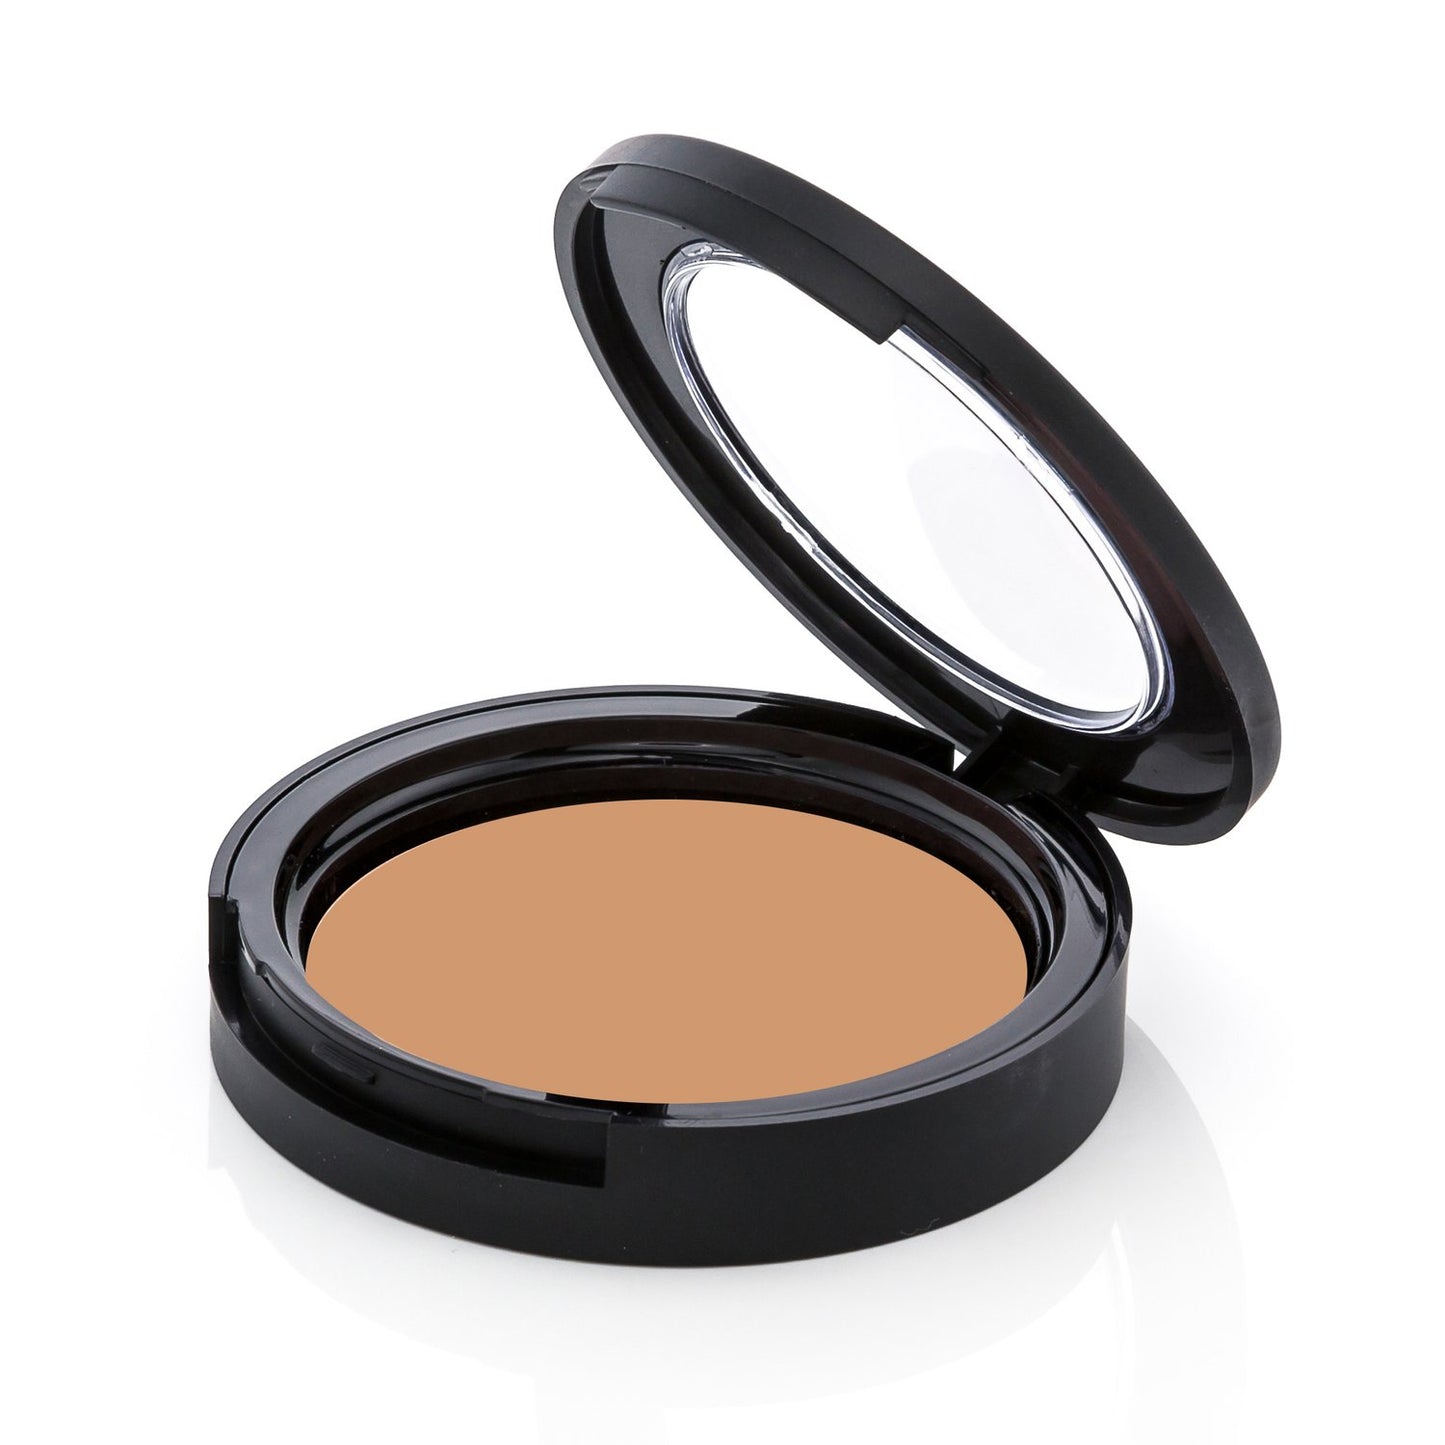 Picture Perfect Foundation - Sheer Tan